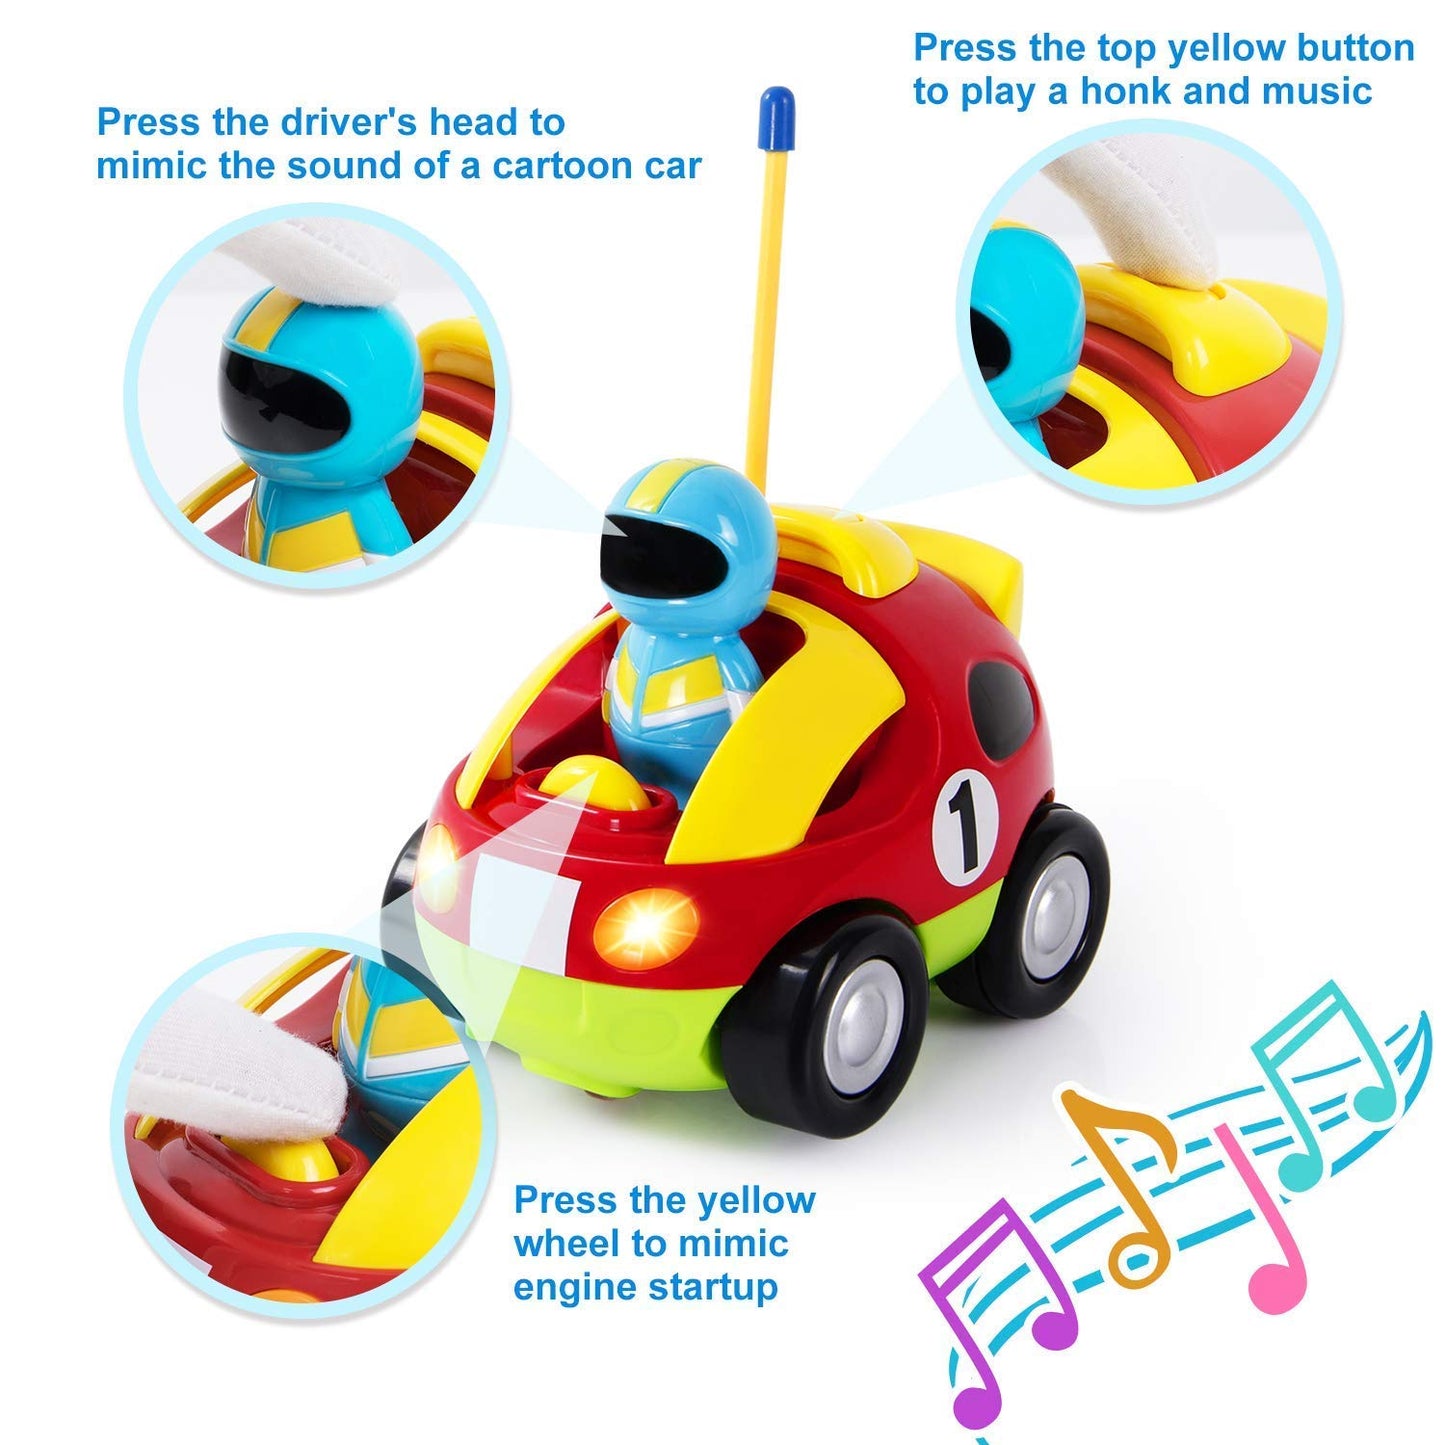 Cartoon R/C Race Car Radio Control Toy for Toddlers (English Packaging)